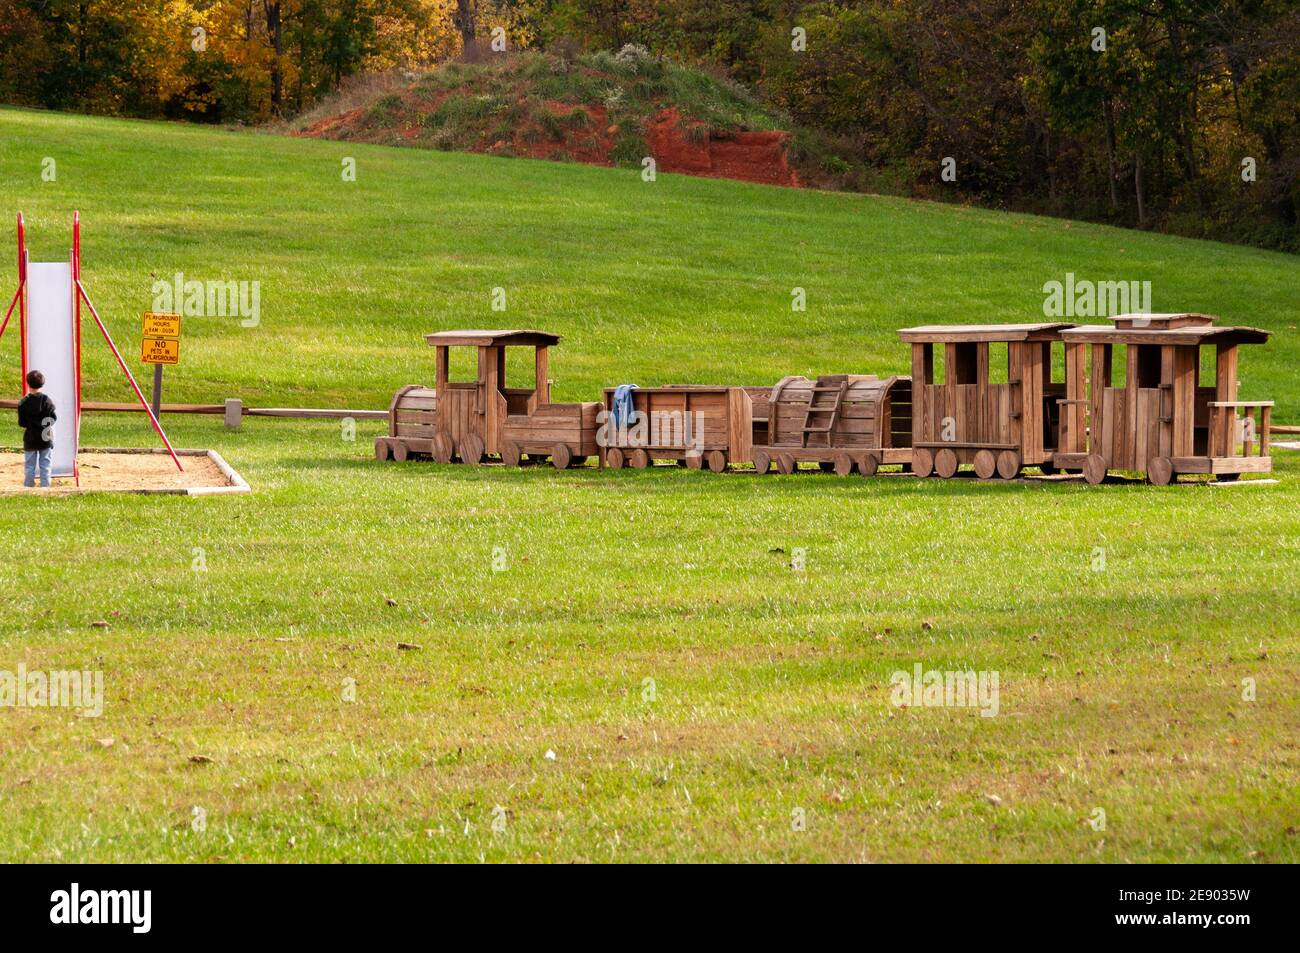 4-6 year old Caucasian boy stands in front of a slipper-slide in a play park that includes a large wooden train. USA. Stock Photo